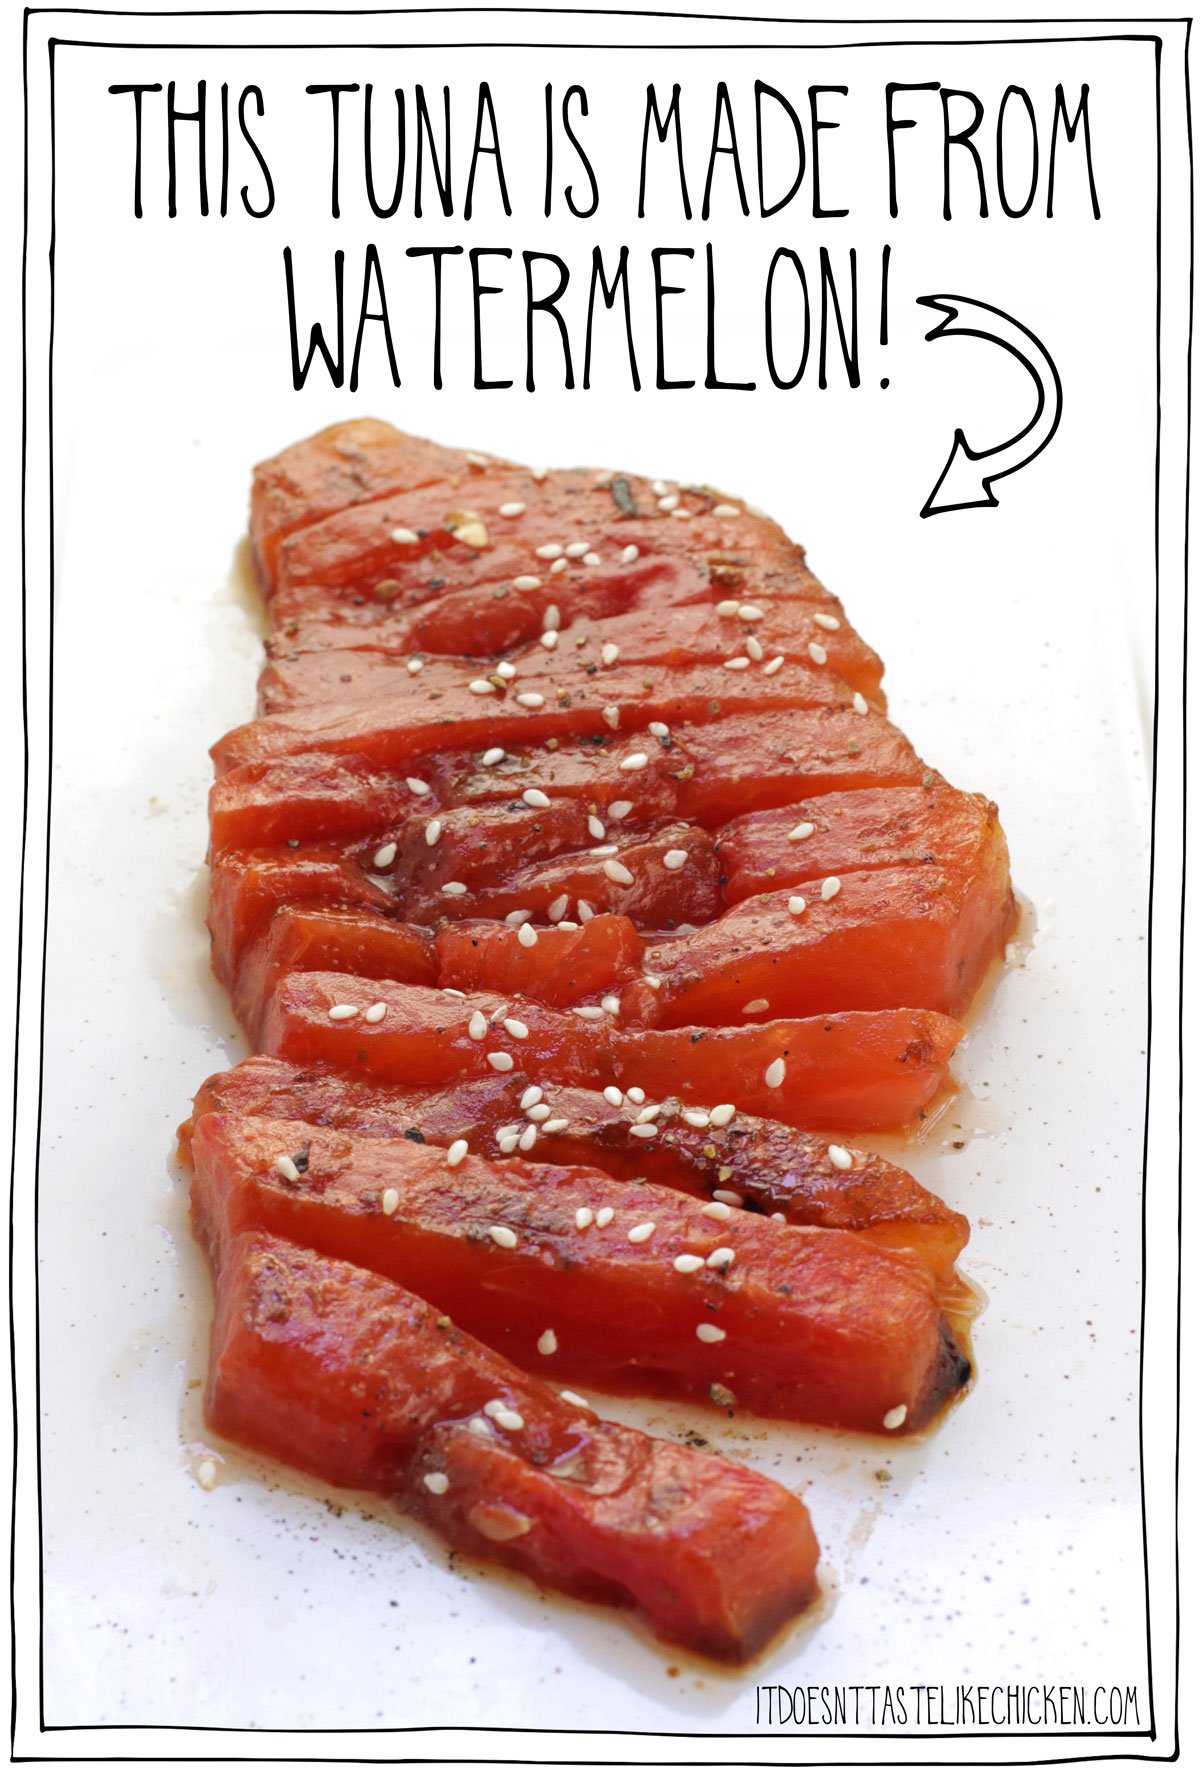 You won't believe this watermelon tuna recipe! Just 7 ingredients and 1 hour of hands-off baking is all it takes to transform regular watermelon into a vegan tuna steak- no fishies harmed! Nori, soy sauce, miso paste, and a few other ingredients are used to season the watermelon, then the key is to bake the watermelon, which completely changes the watermelon to a tender raw fish texture. This recipe is a must-try! #itdoesnttastelikechicken #veganseafood